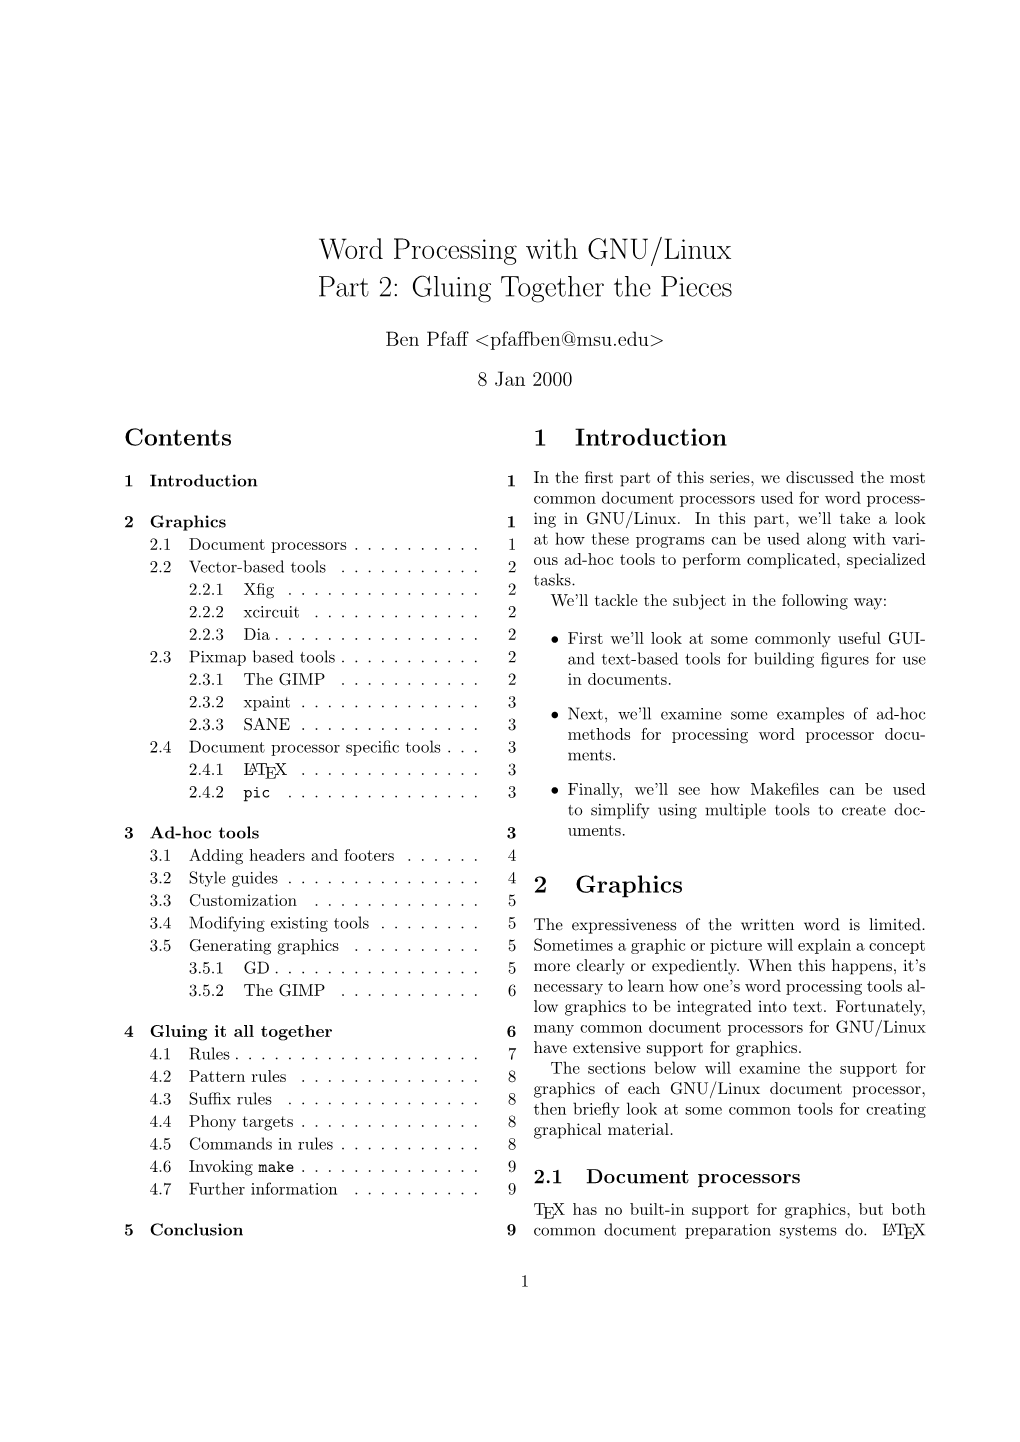 Word Processing with GNU/Linux Part 2: Gluing Together the Pieces